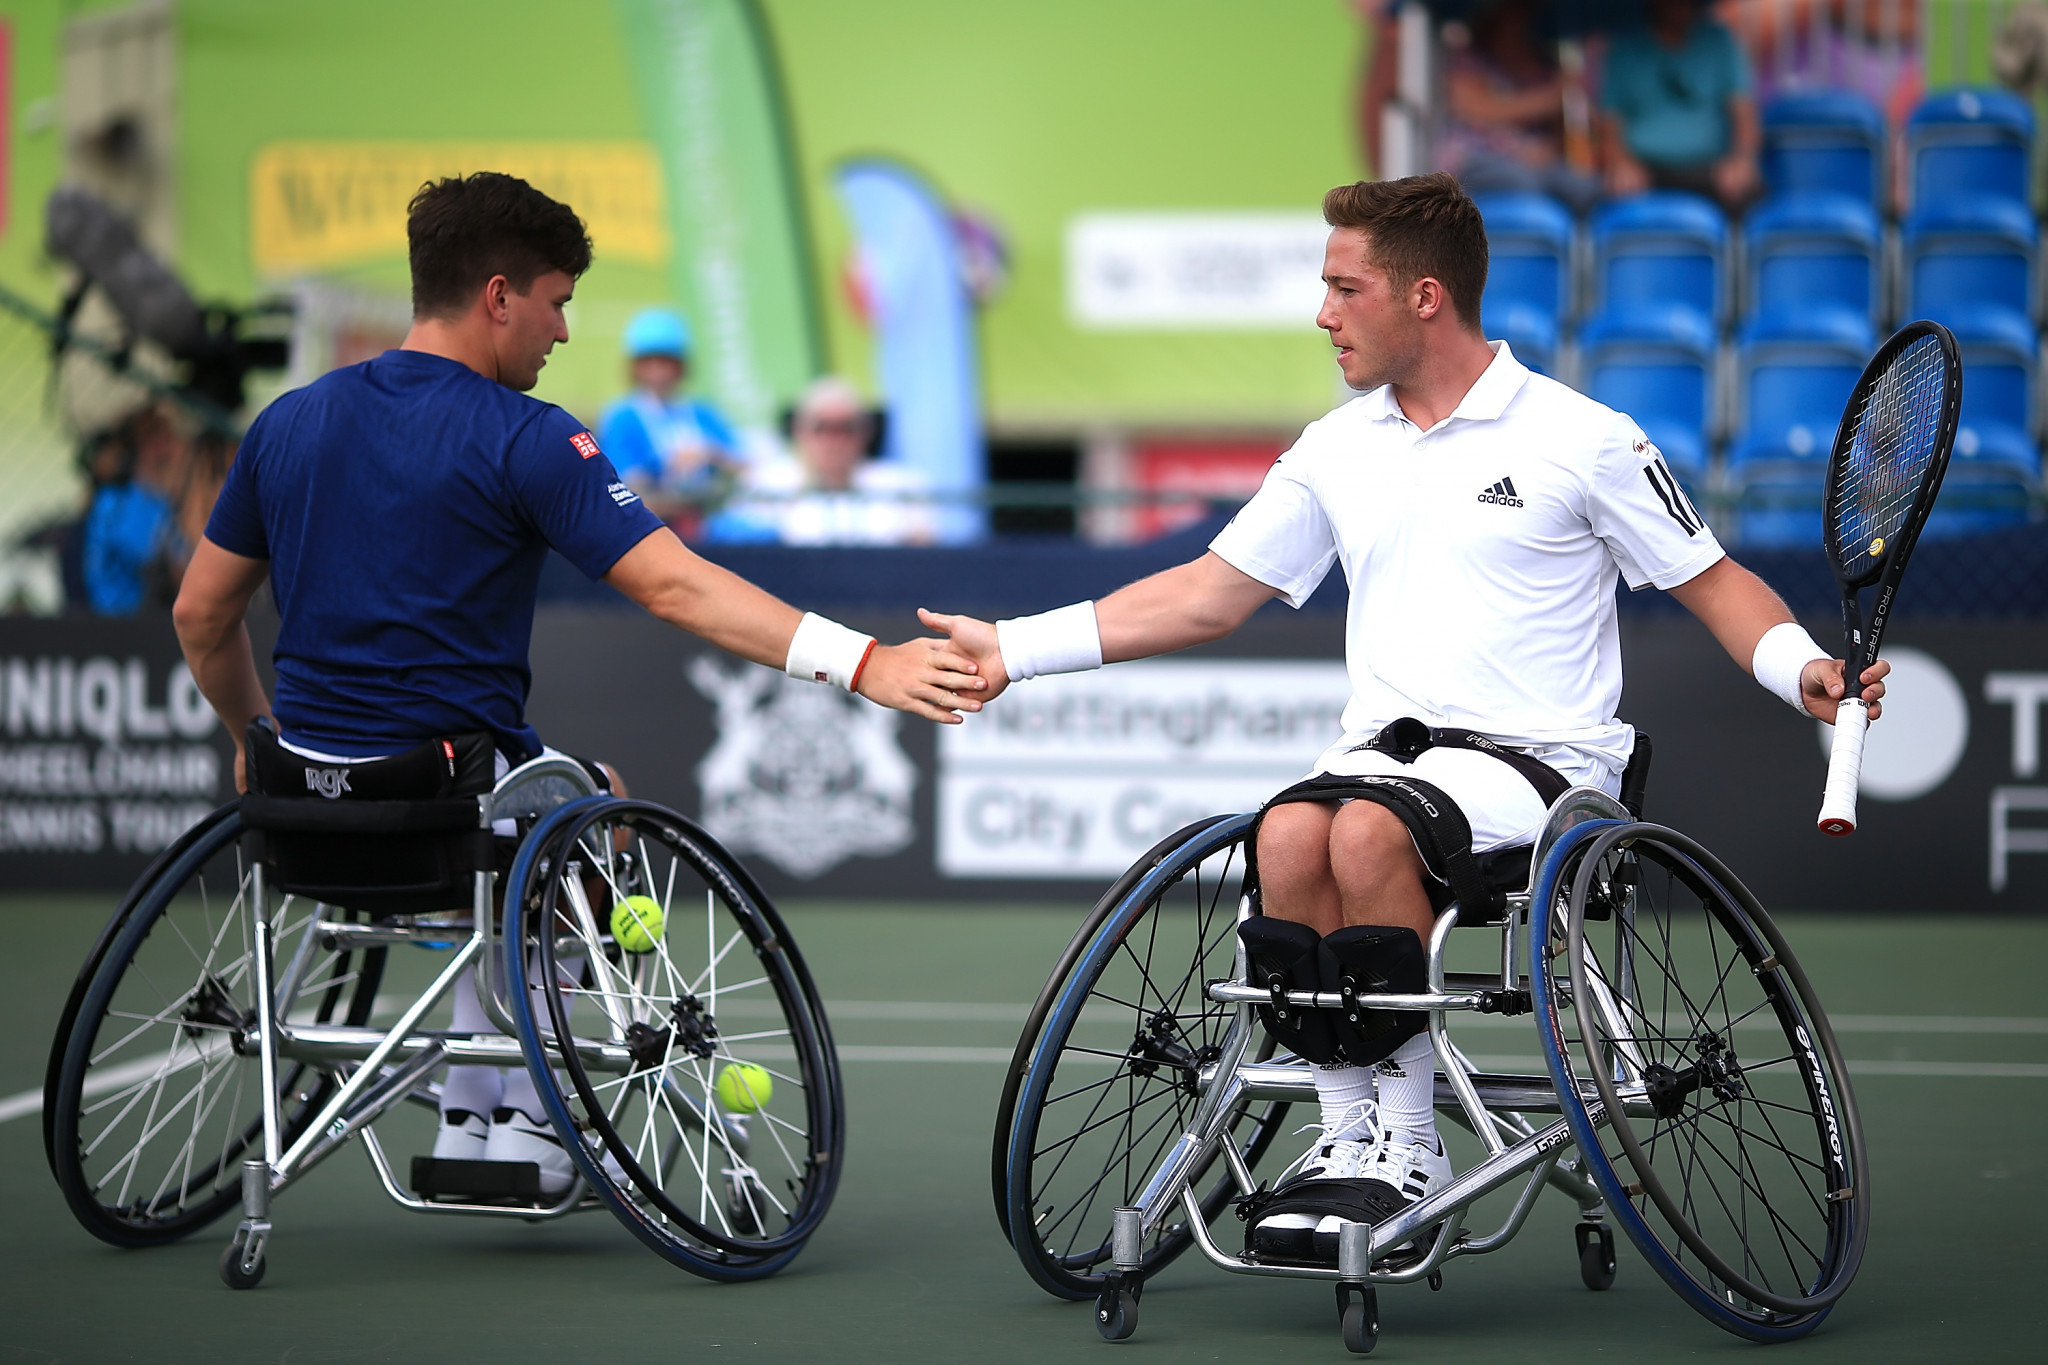 Great Britain's Alfie Hewett and Gordon Reid were able to open the defence of their US Open men's doubles wheelchair tennis title before their match was postponed ©Getty Images